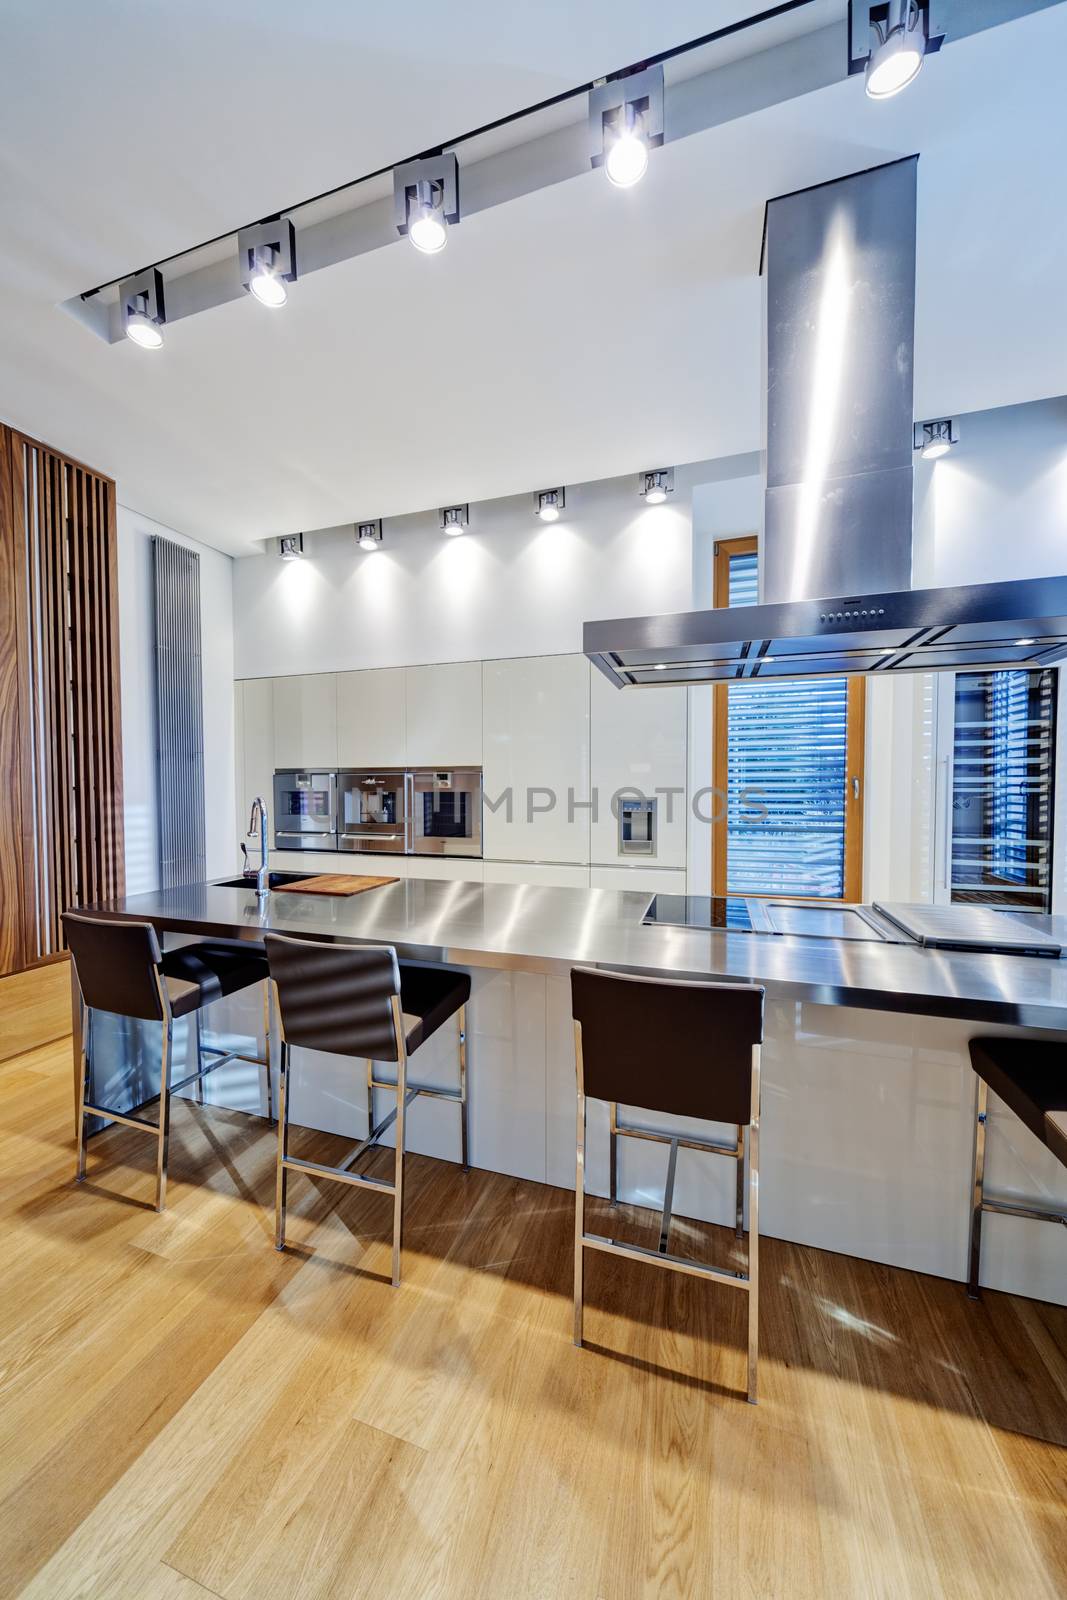 Modern kitchen interior with stainless steel sink and appliances